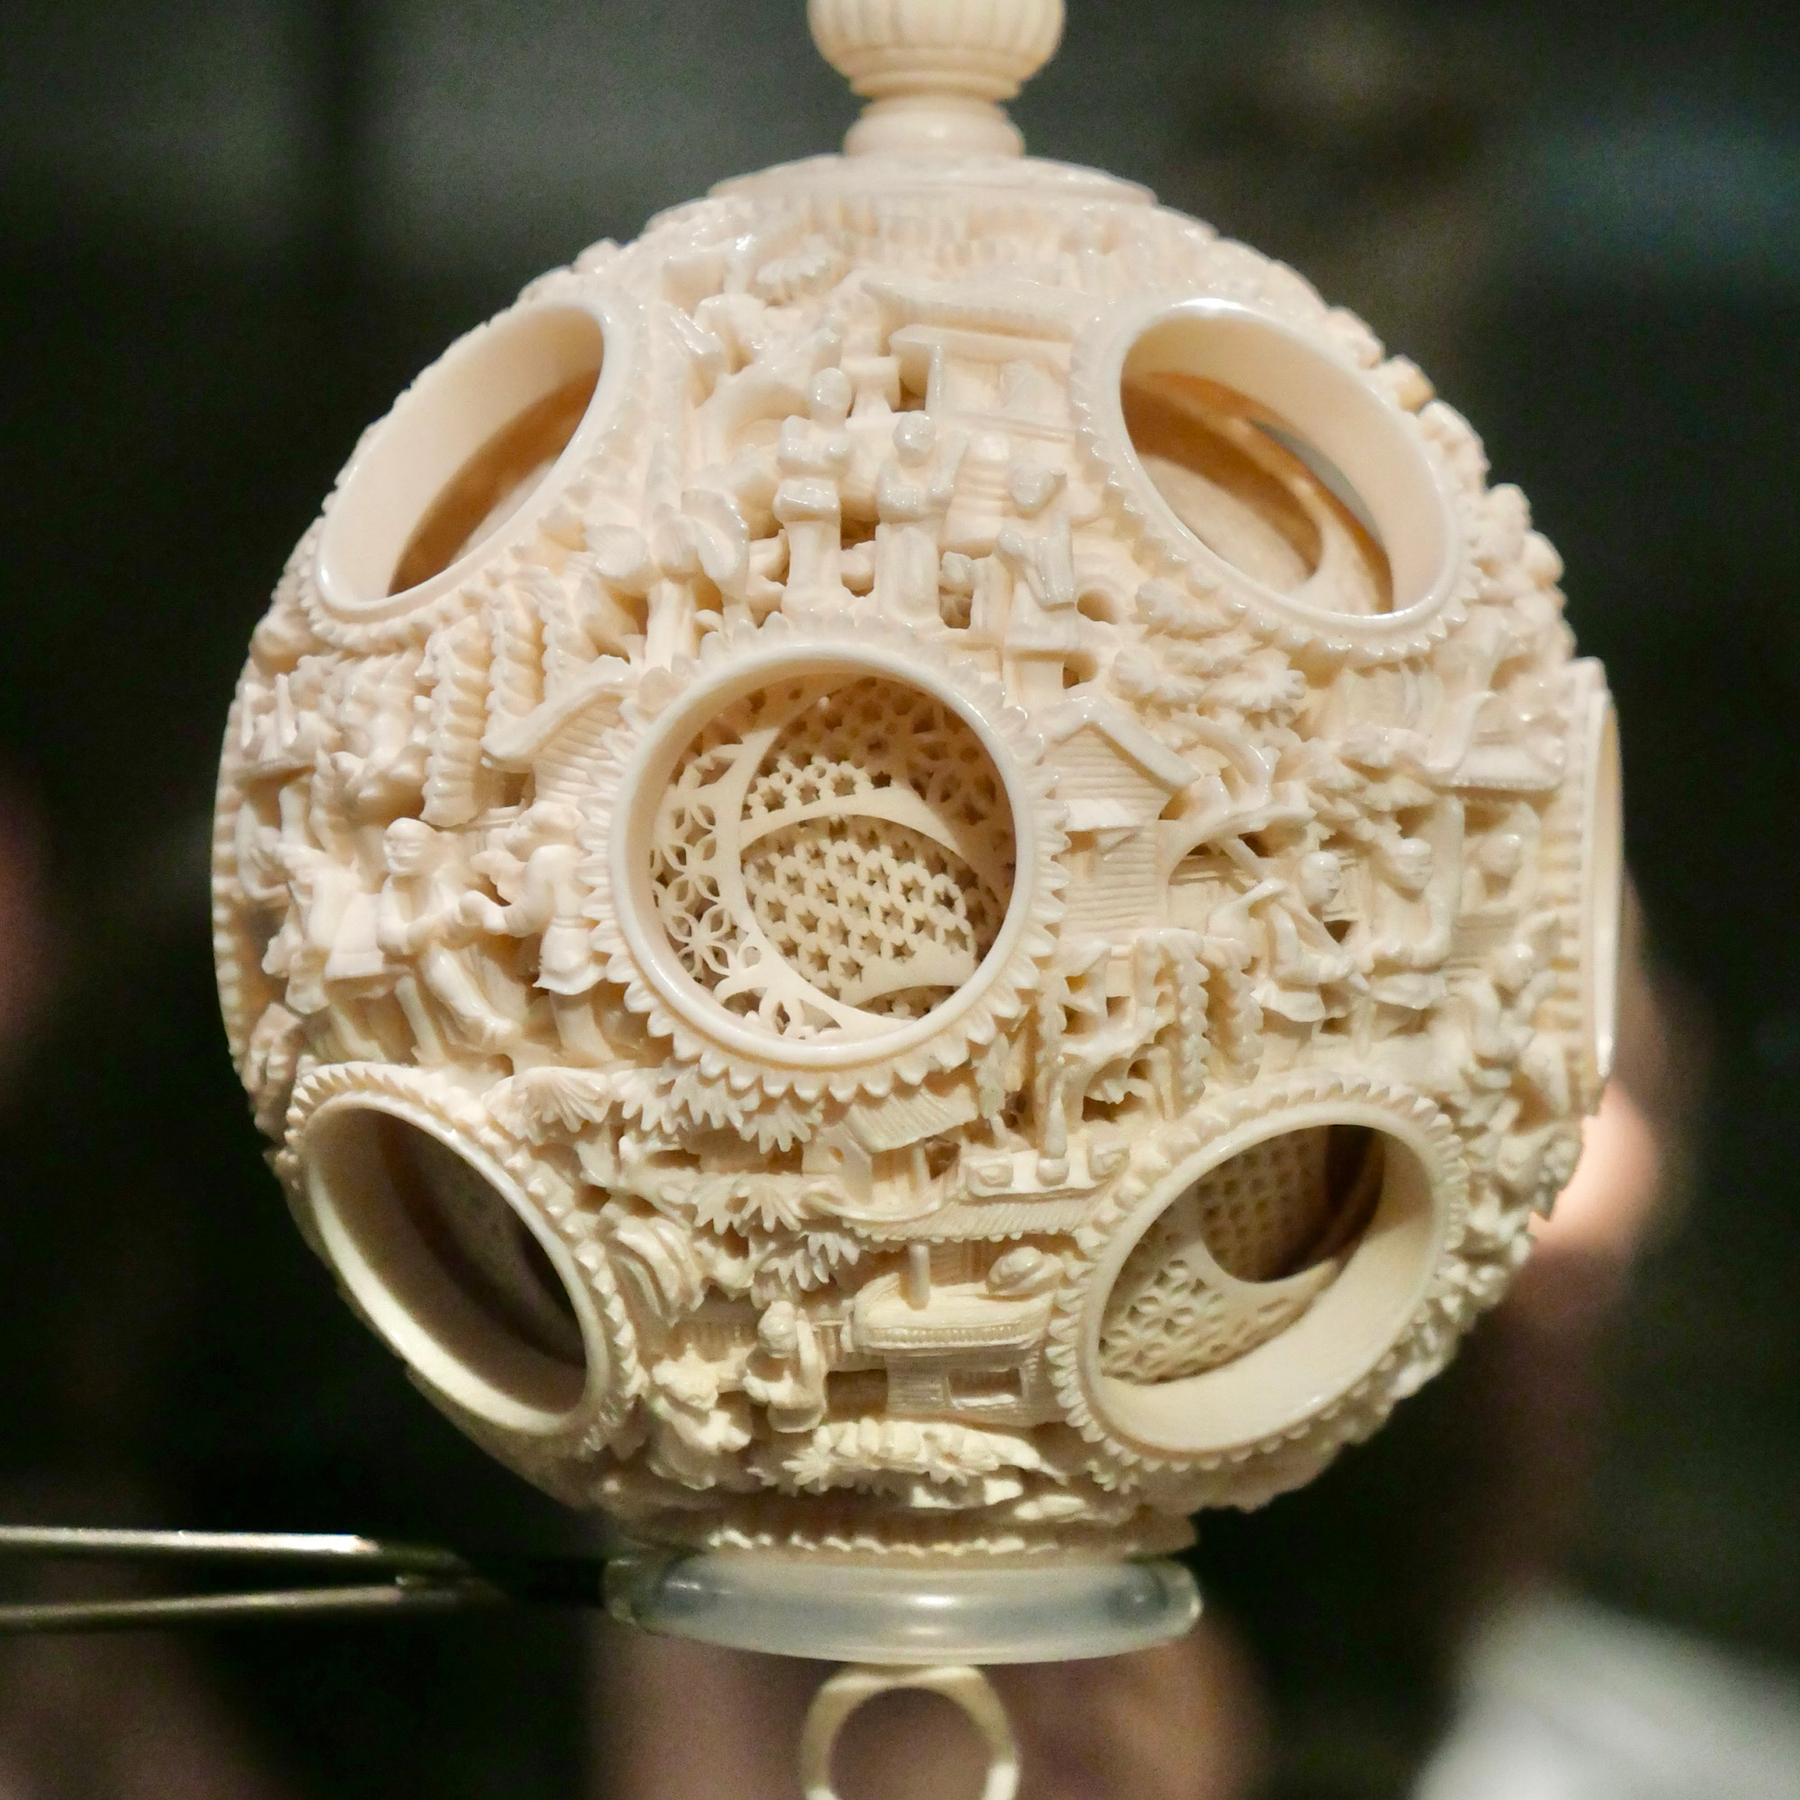 Intricately carved ivory ball with large holes revealing more layers inside